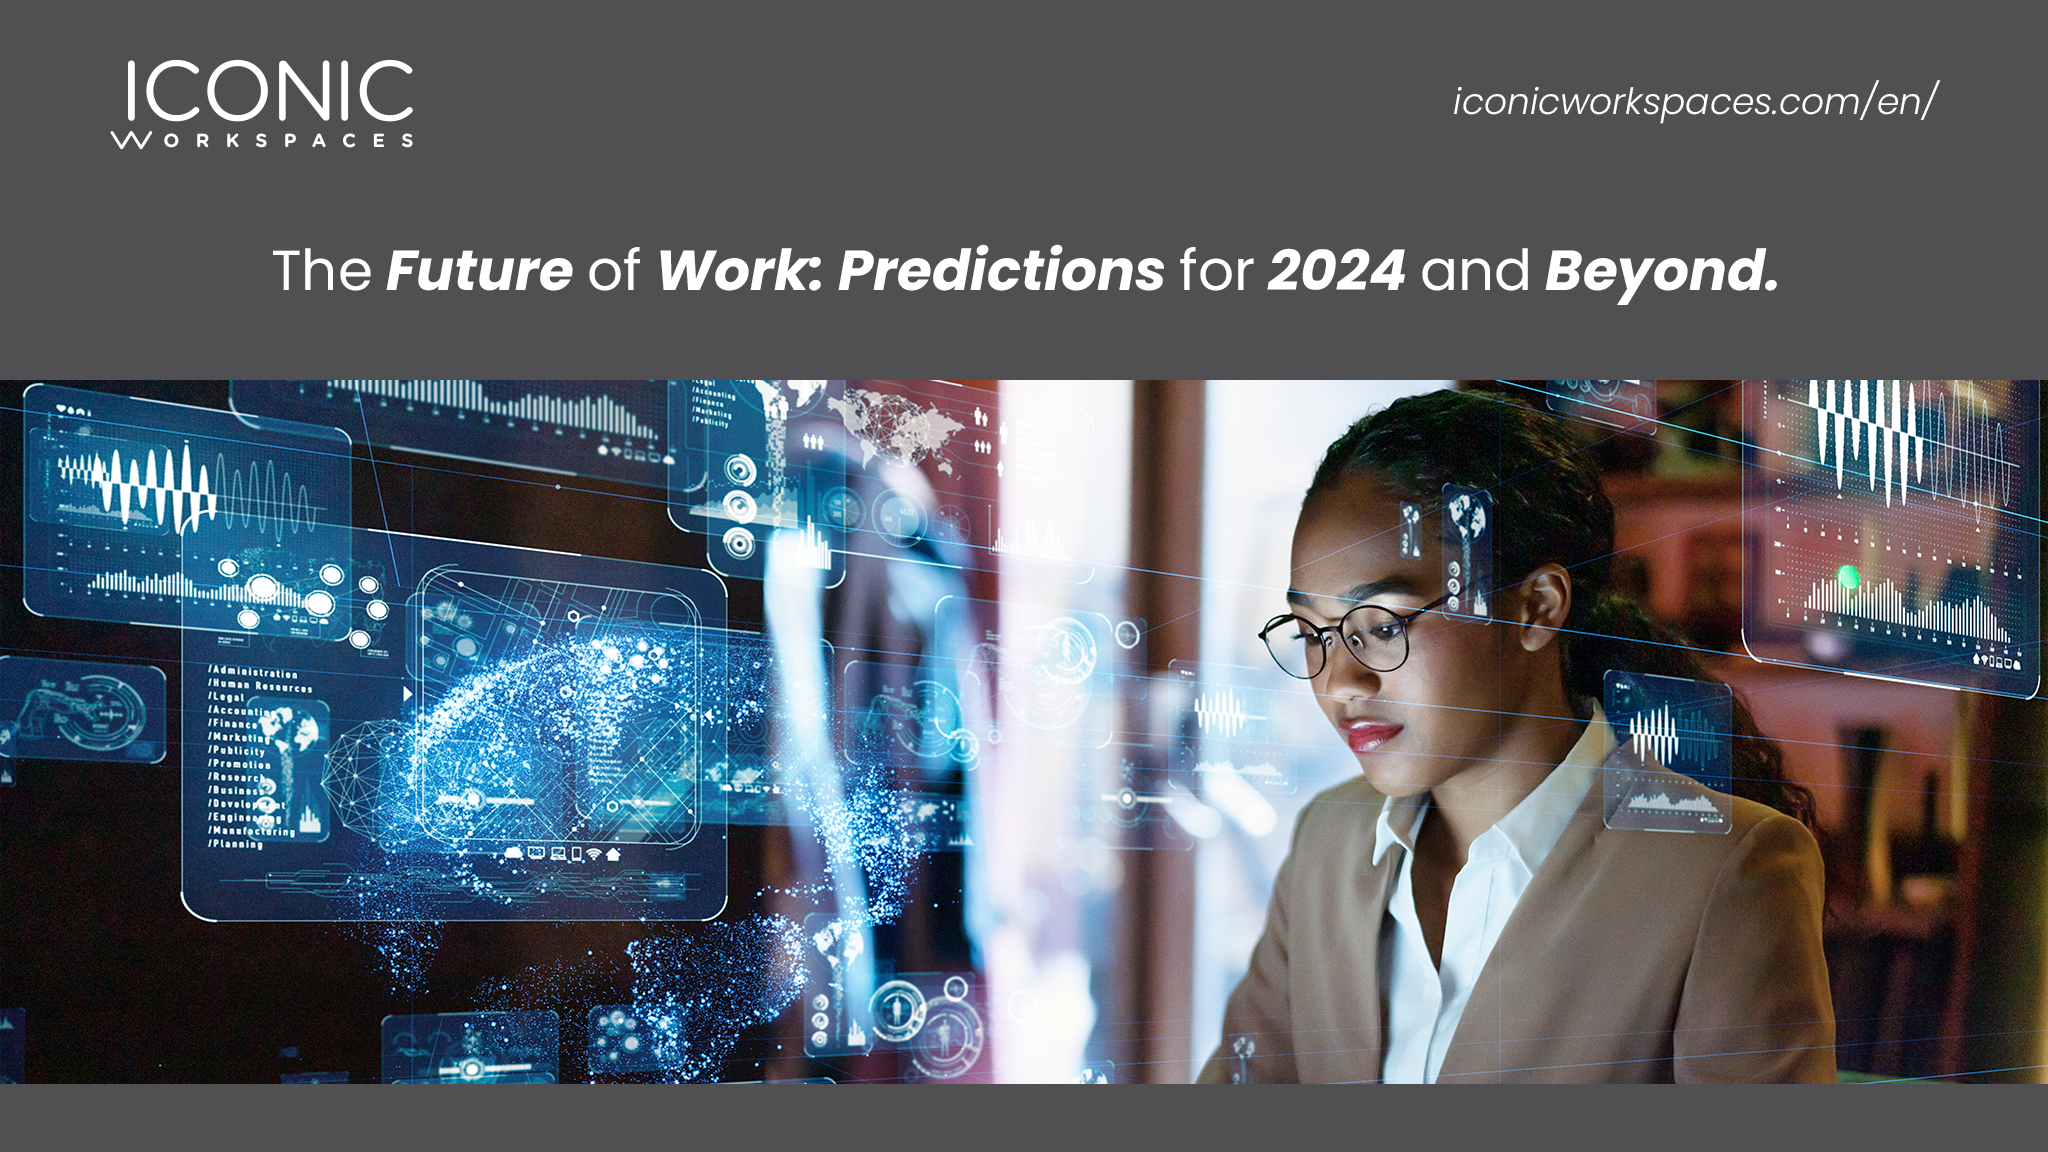 The Future of Work: Predictions for 2024 and Beyond